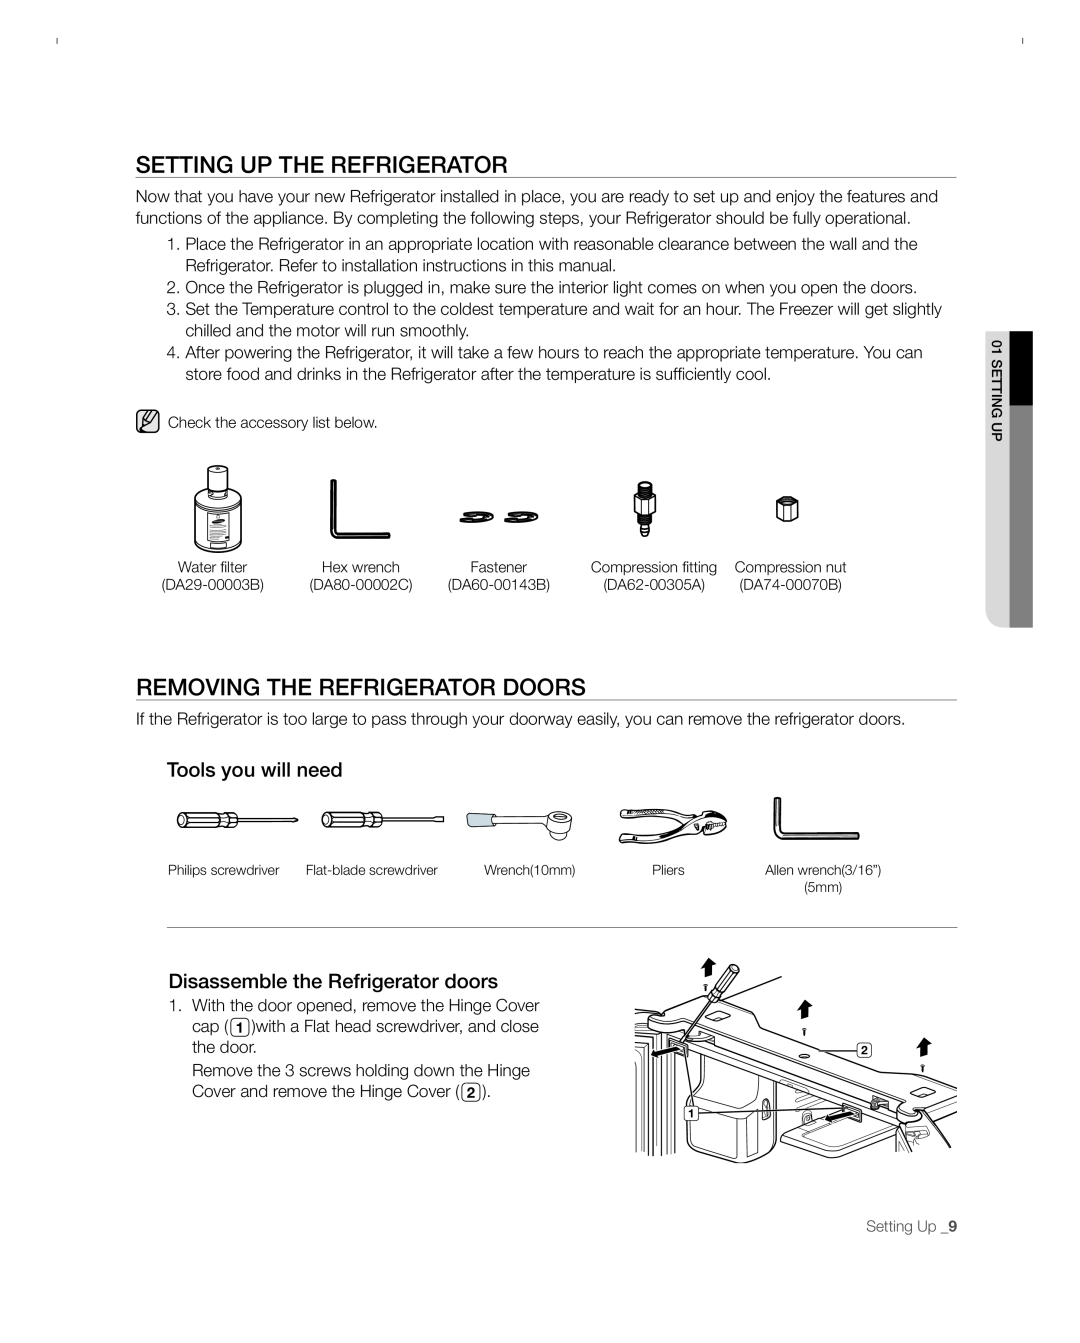 Samsung RFG297ACBP user manual setting uP tHe ReFRigeRAtoR, Removing the refrigerator doors, Tools you will need 